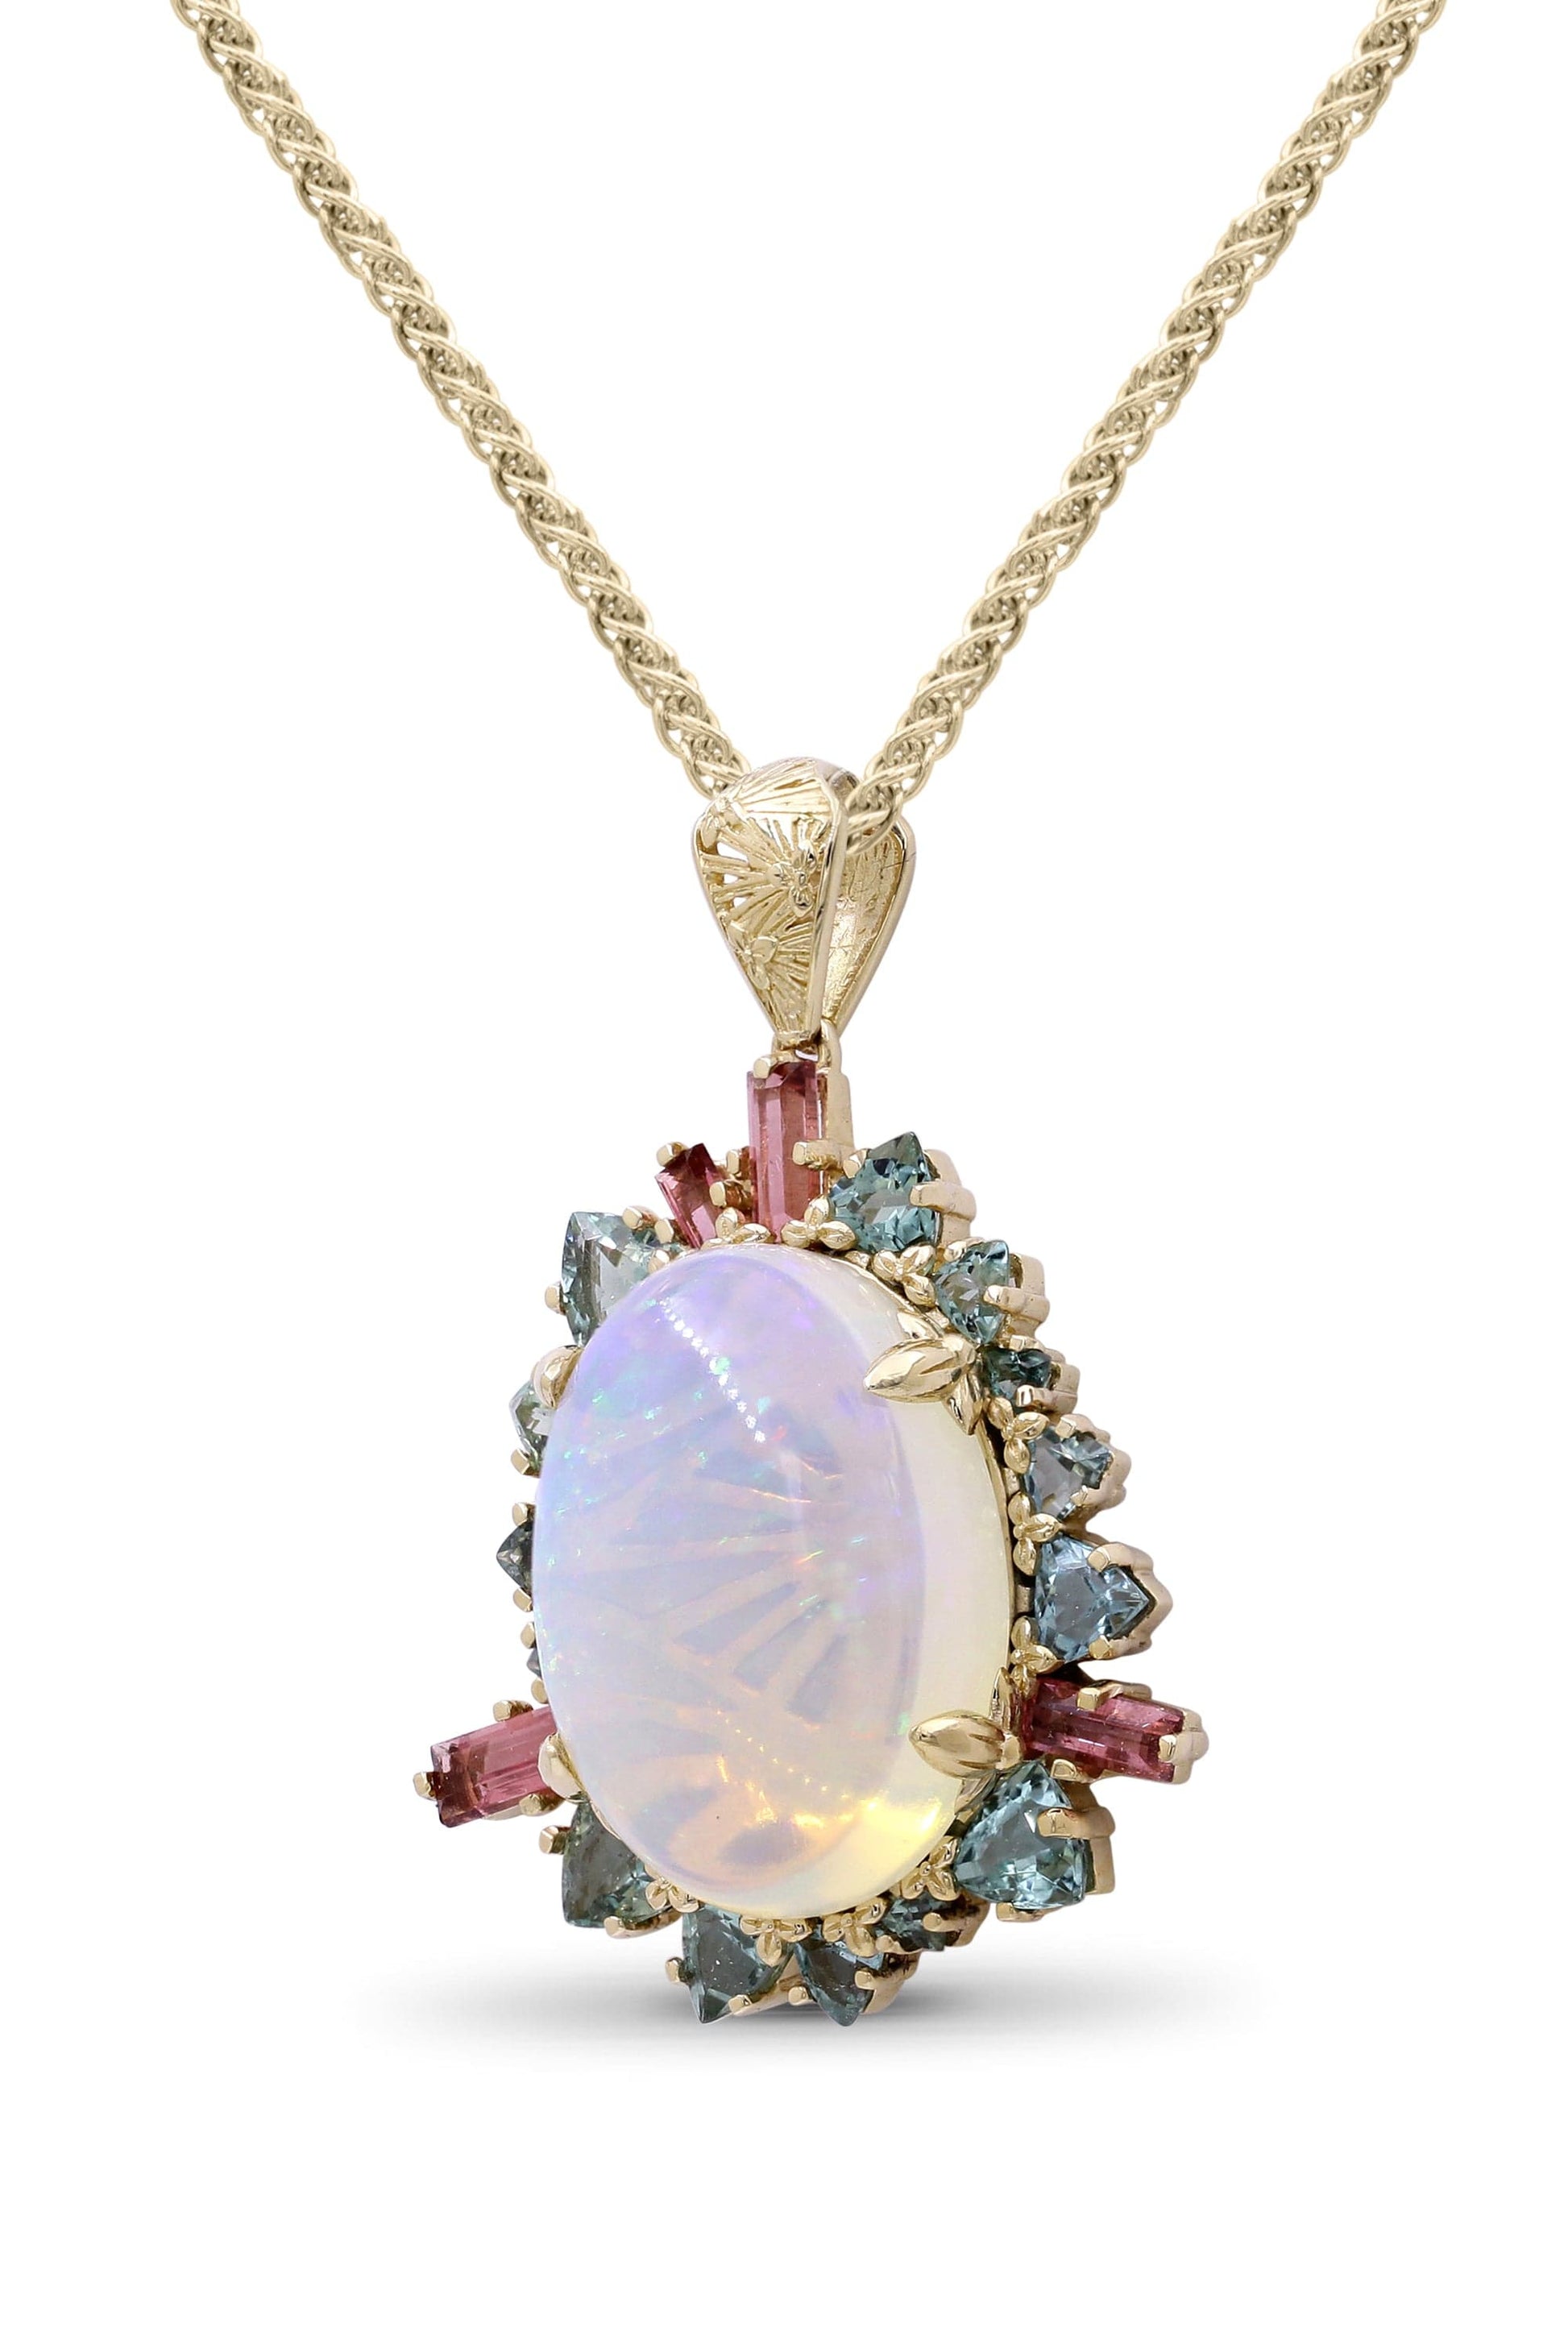 STEPHEN DWECK-Opal and Tourmaline Necklace-YELLOW GOLD